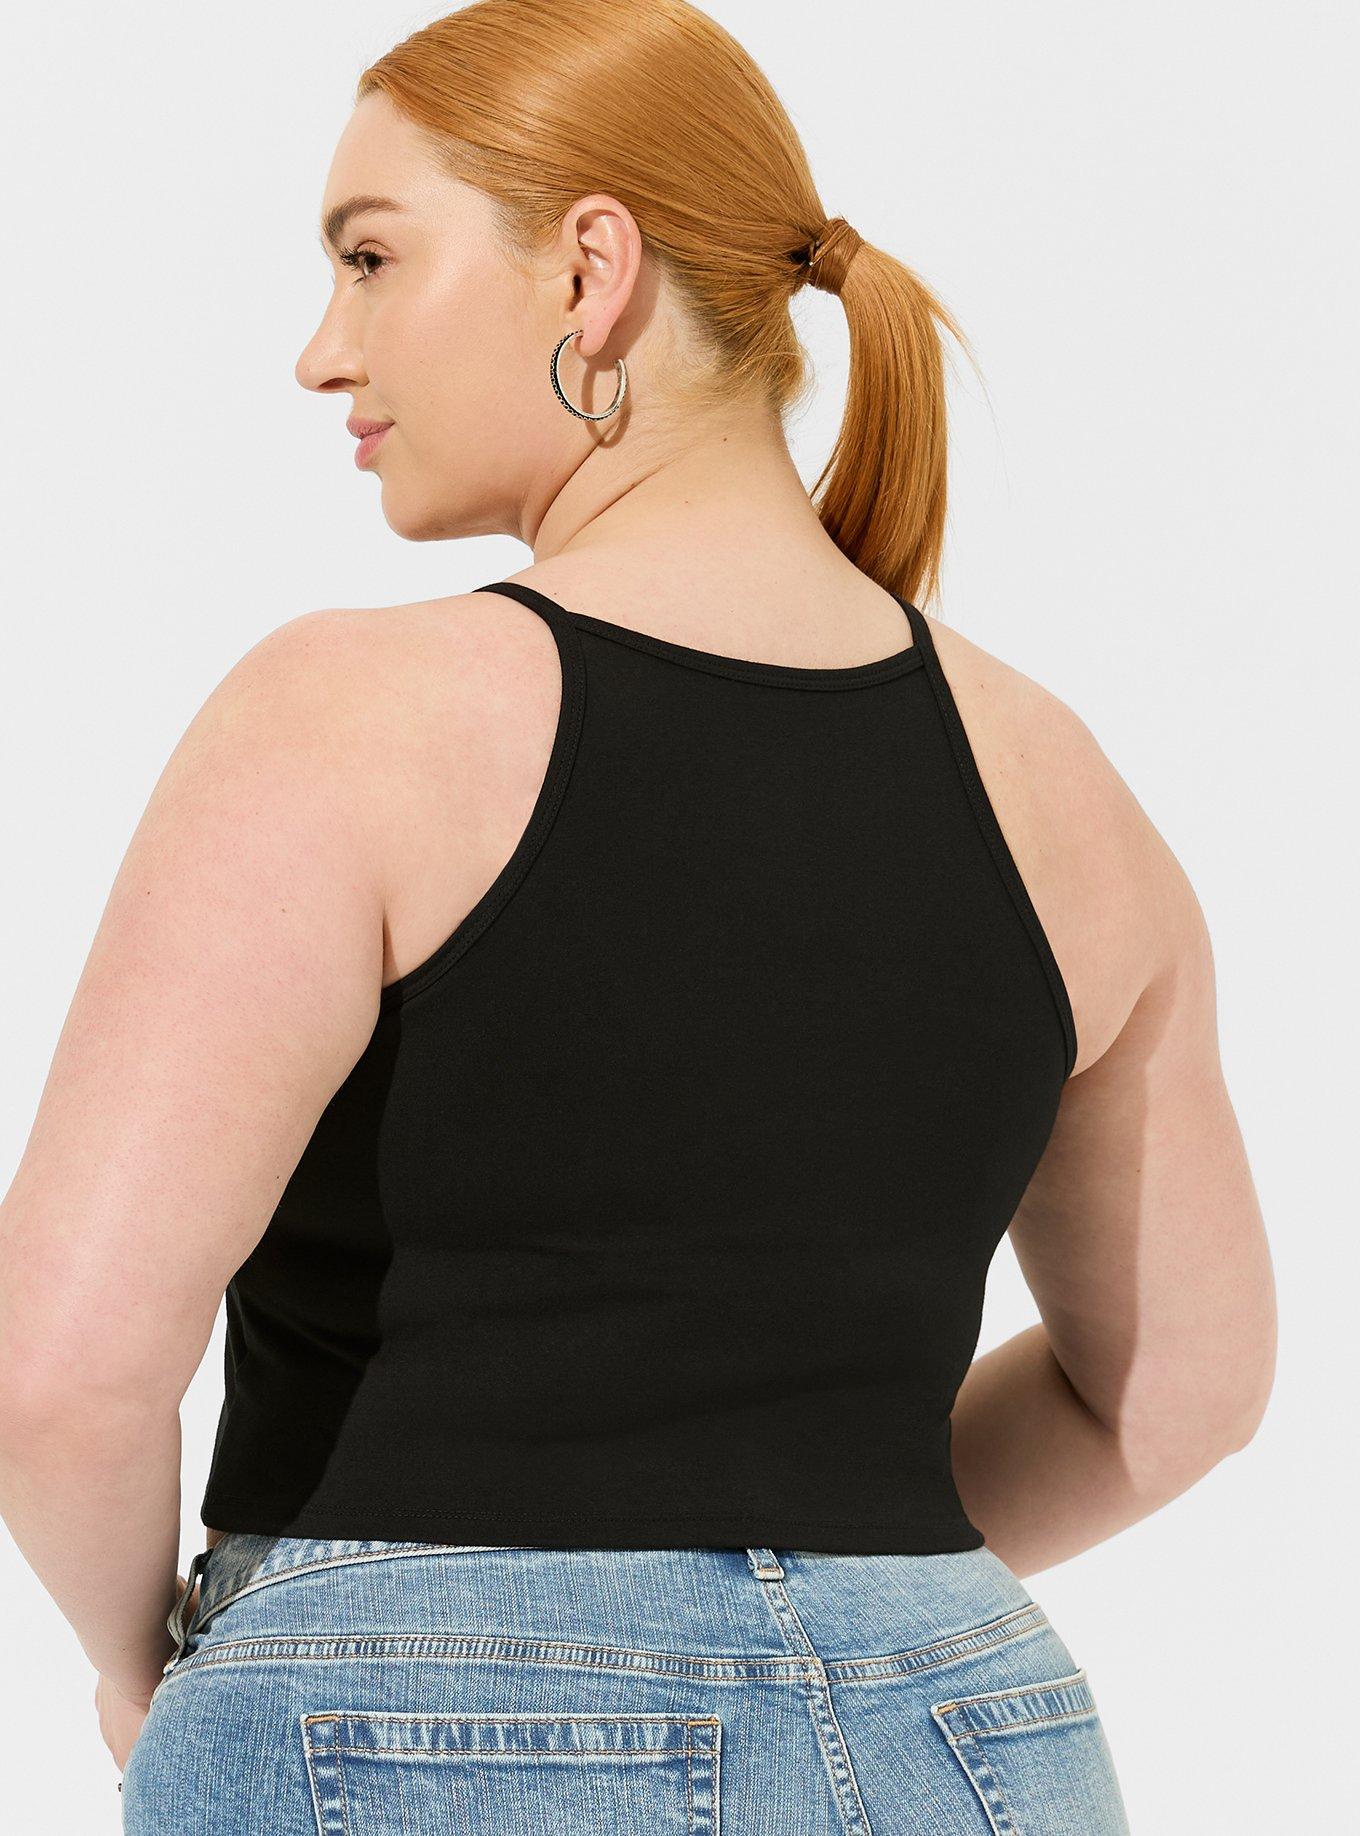 Buy lucky brand plus size tops 1x NWT Online India